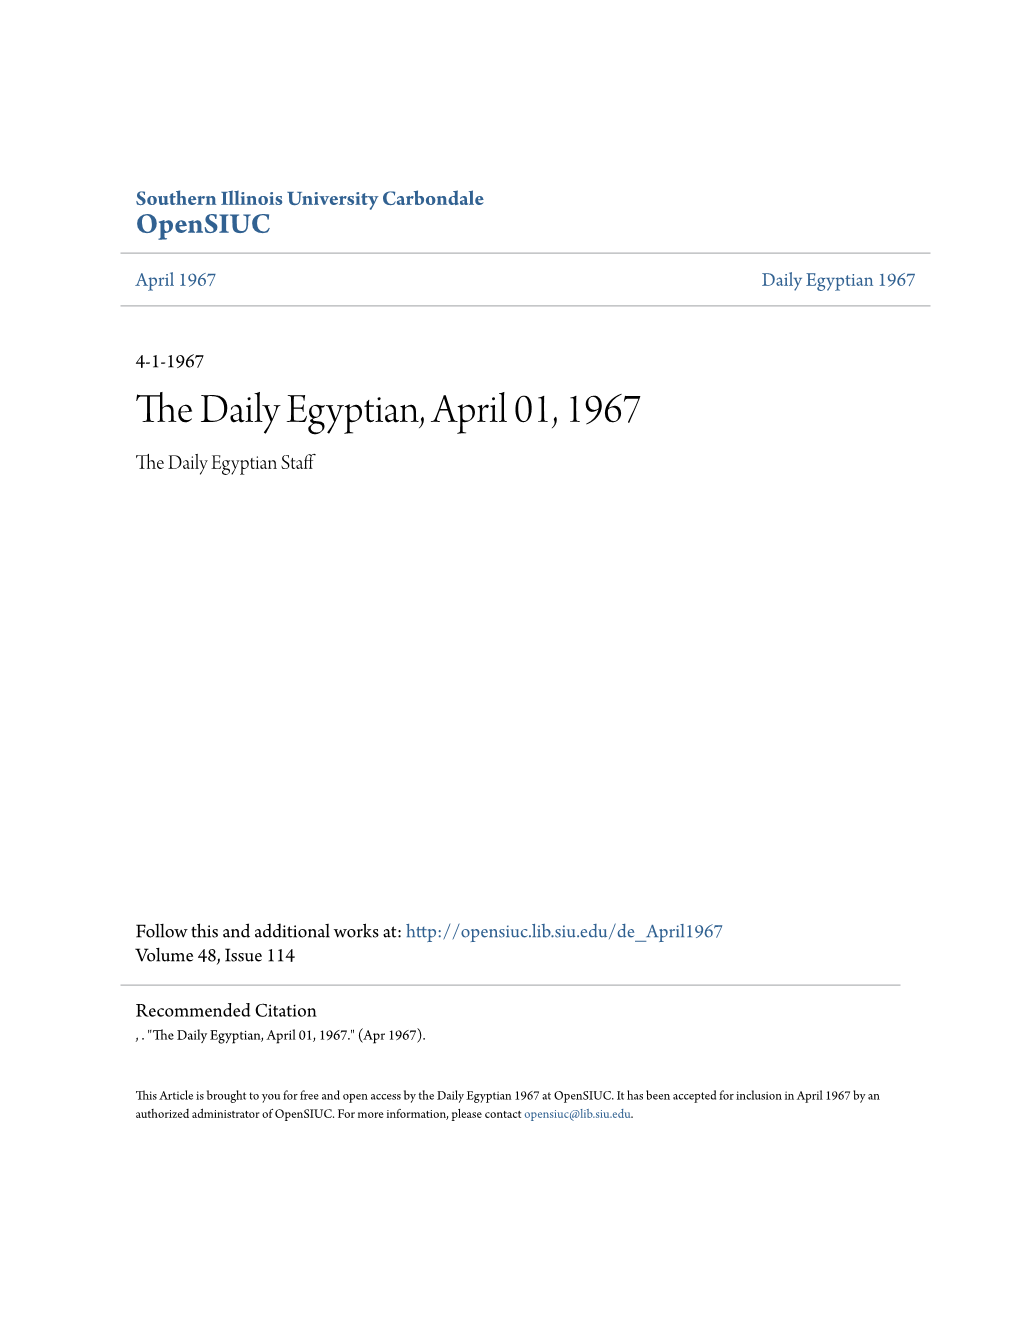 The Daily Egyptian, April 01, 1967